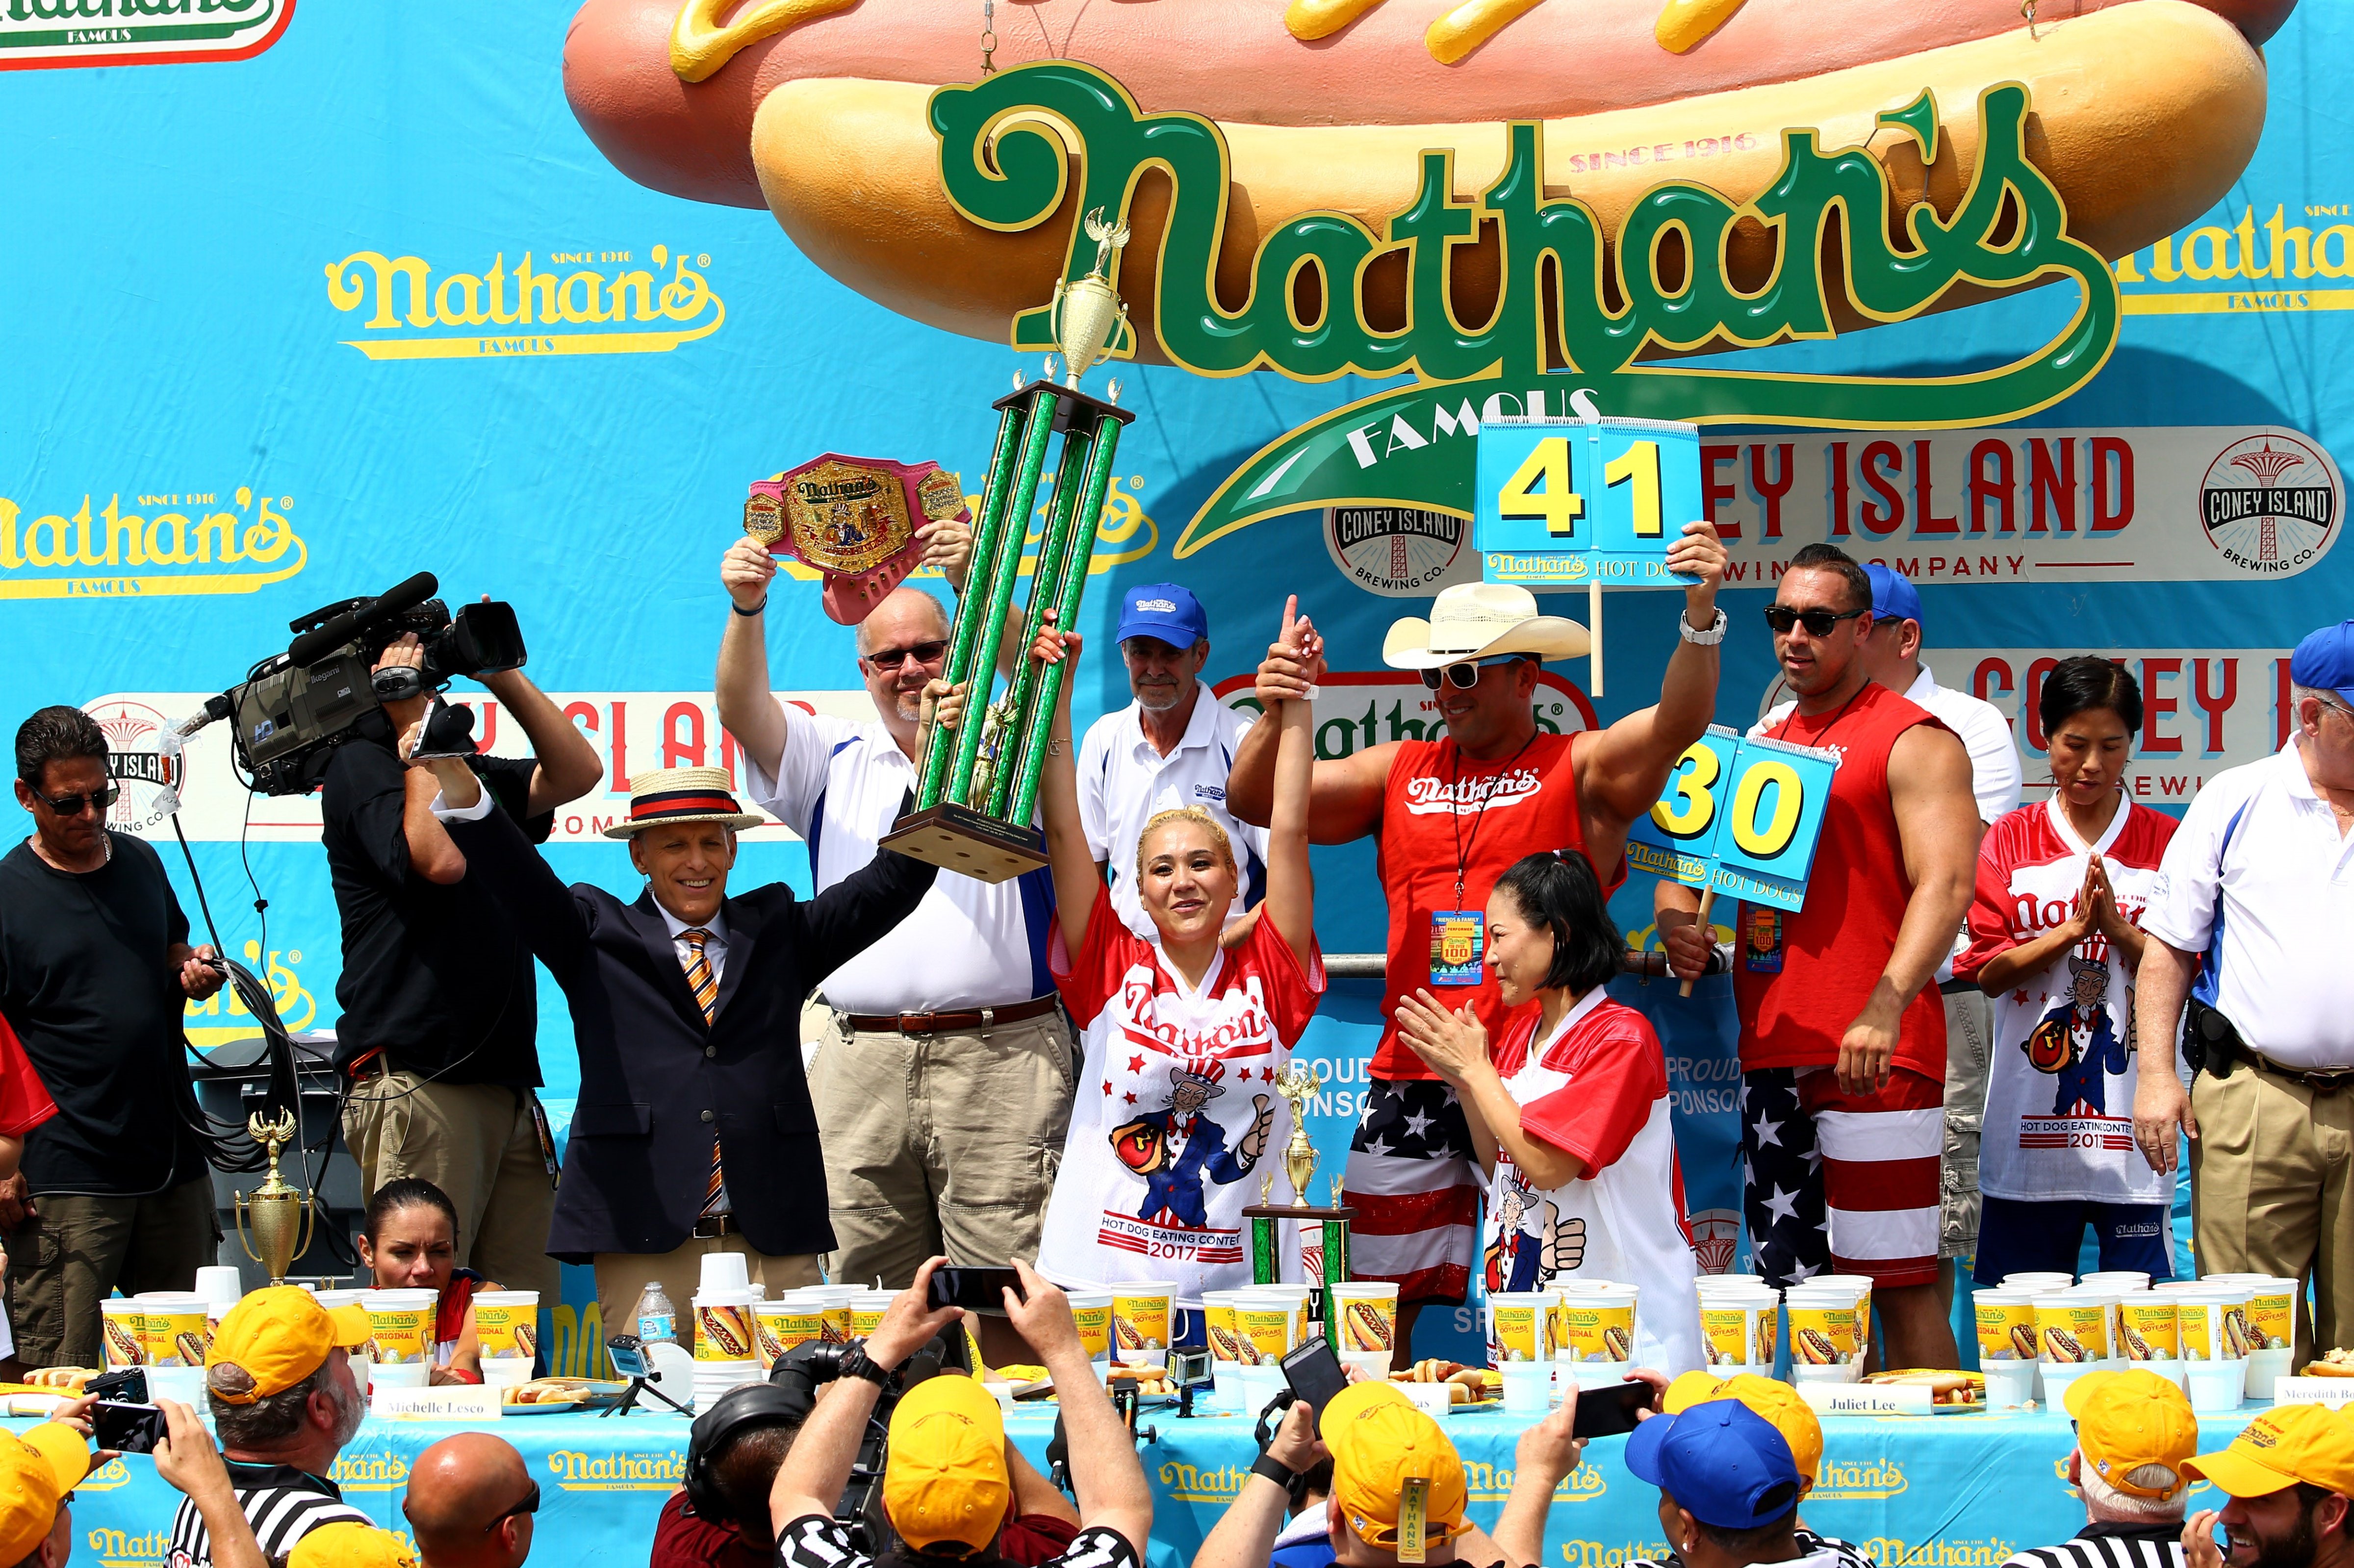 Miki Sudo (center) receives her award after the 2017 Nathan's Famous International Hot Dog Eating Contest (Getty Images)